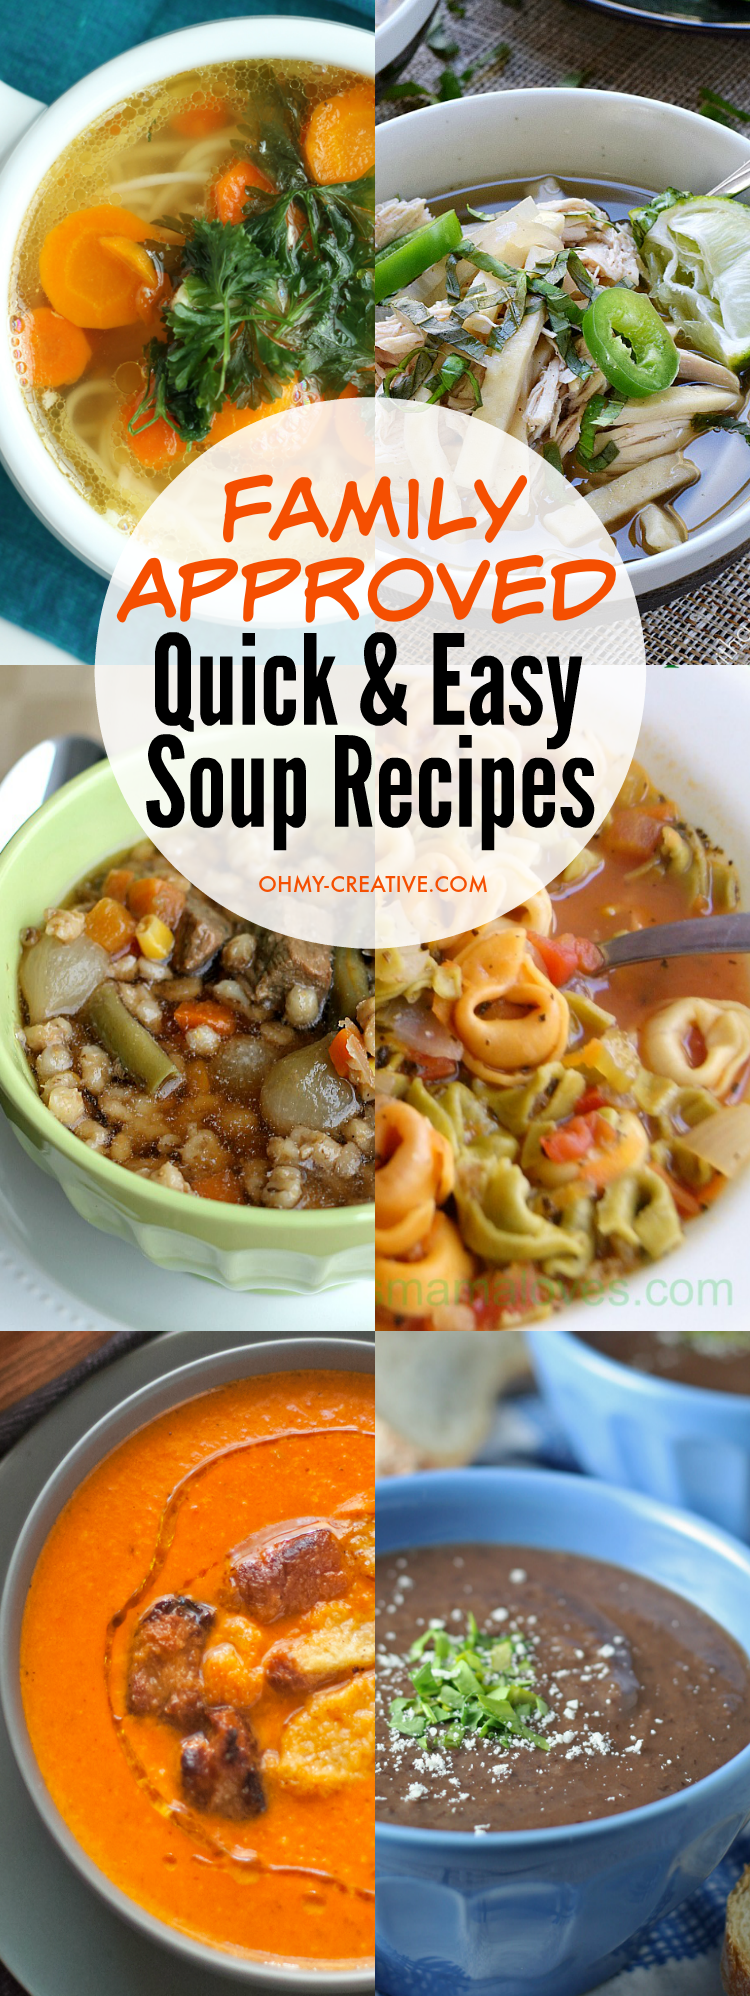 Try one of these Family Approved Quick and Easy Soup Recipes for lunch or dinner tonight! | OHMY-CREATIVE.COM